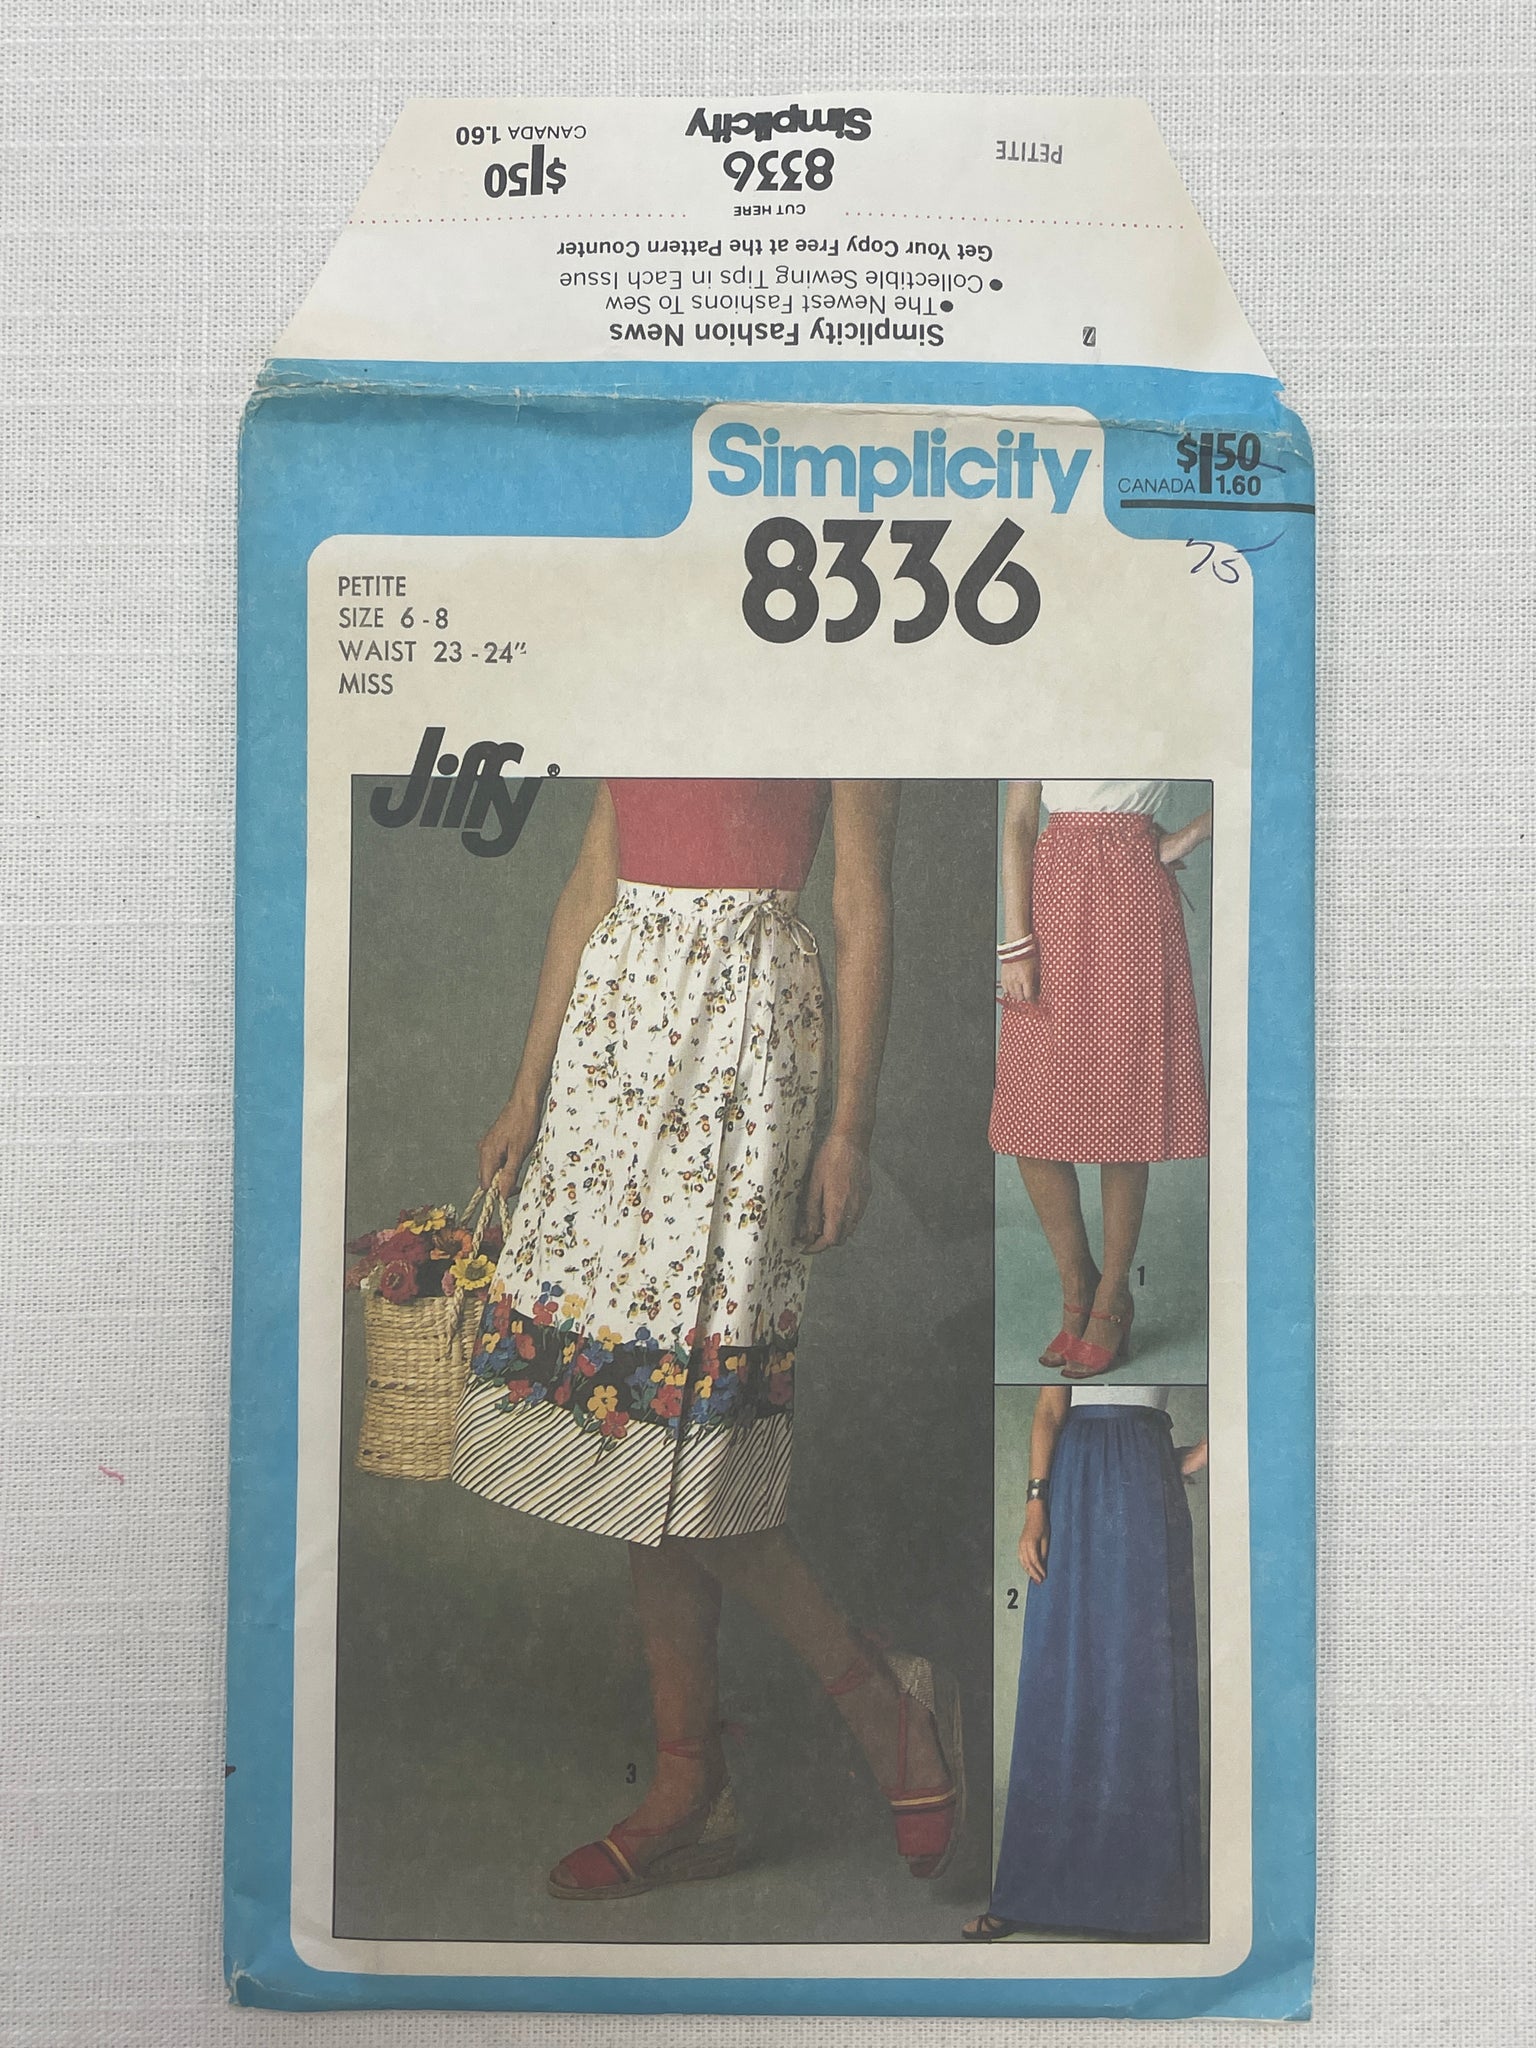 1979 Simplicity 8336 Sewing Pattern - Skirt FACTORY FOLDED